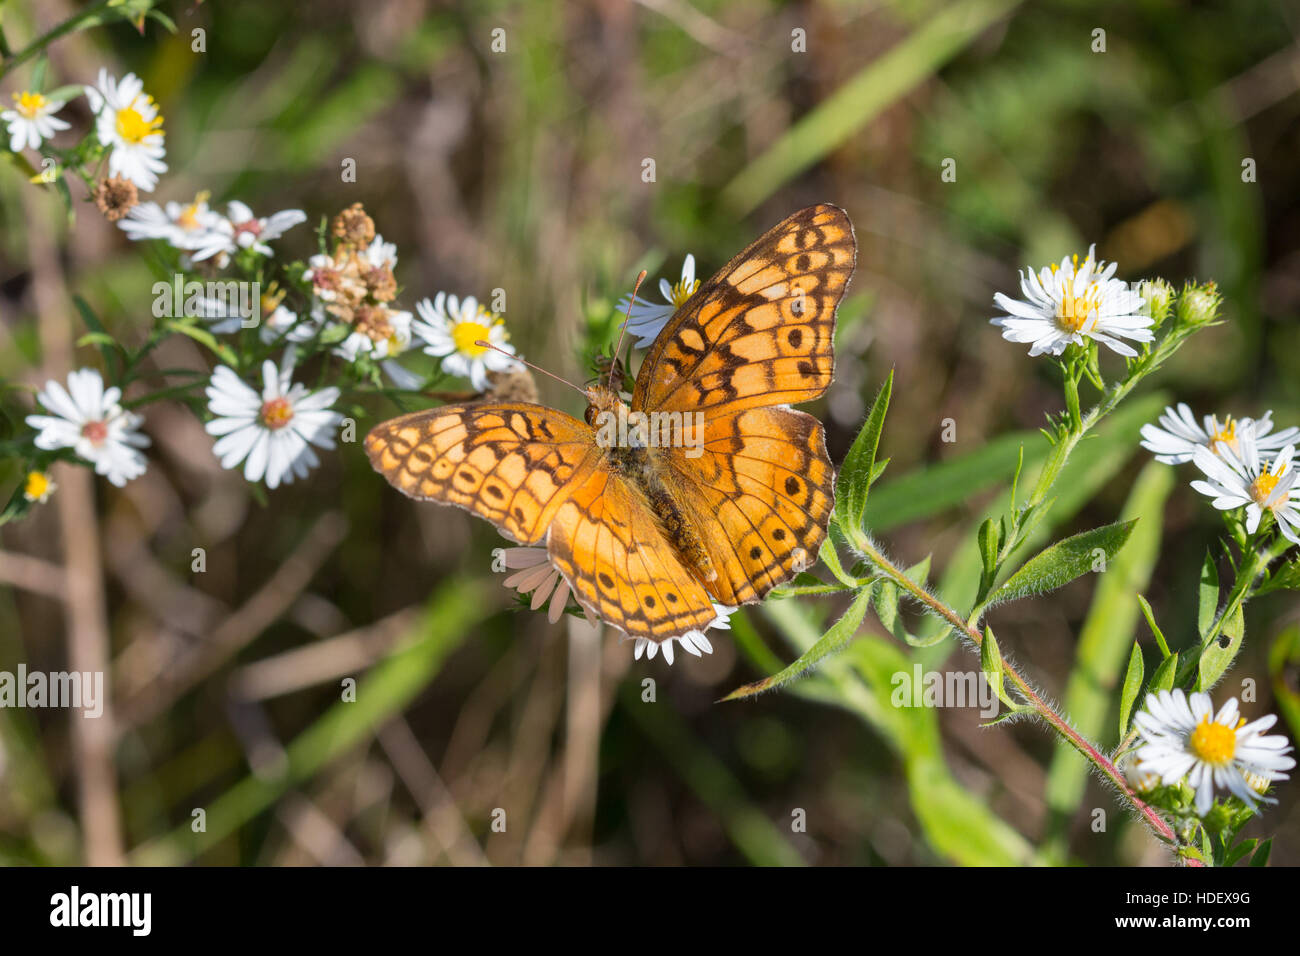 A Variegated Fritillary butterfly (Euptoieta claudia) nectaring white heath aster flower (Symphyotrichum ericoides) Stock Photo